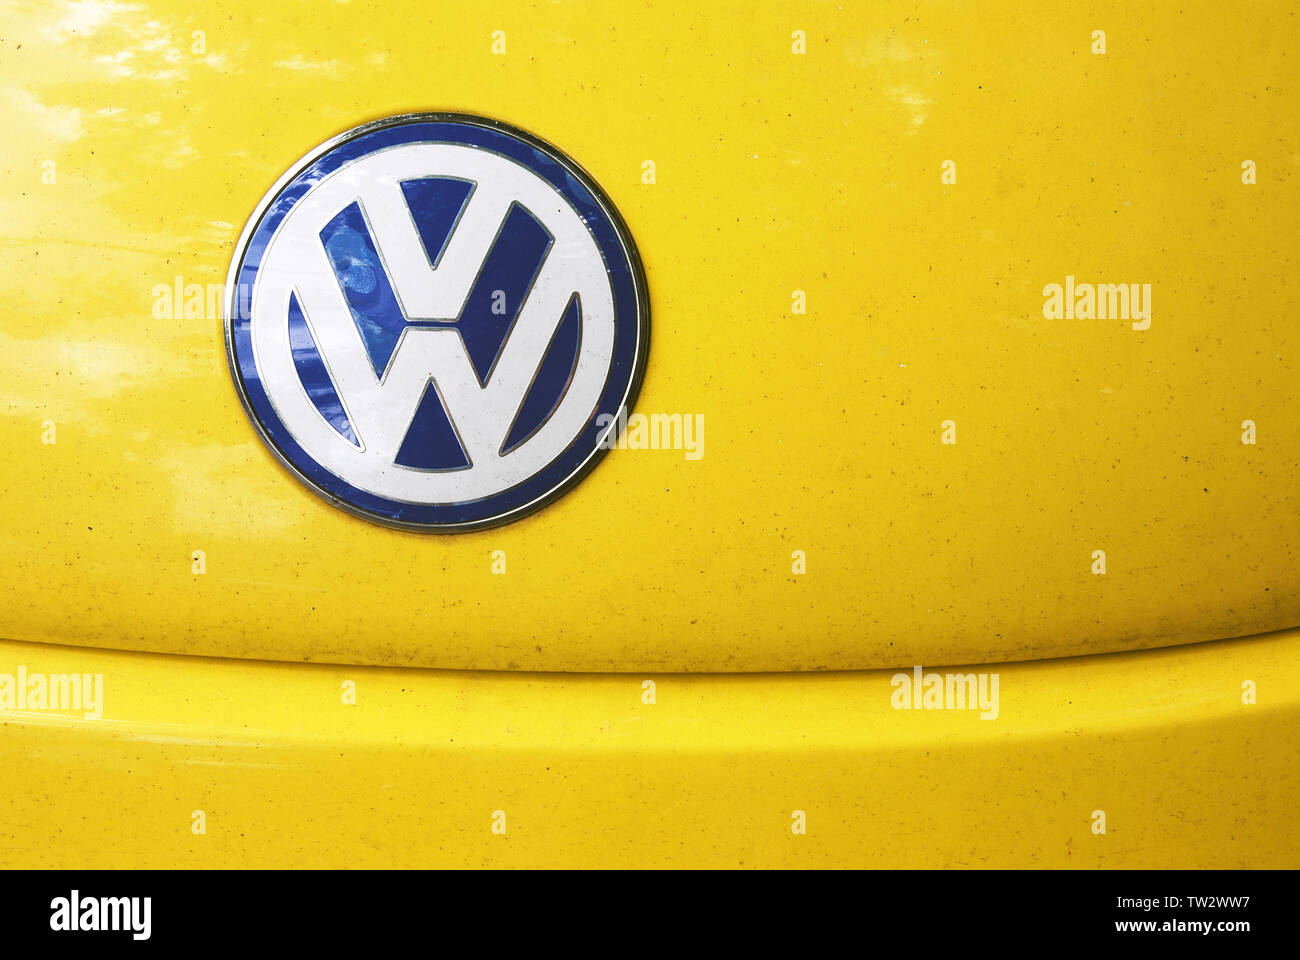 White and blue w symbol imitating Volkswagen icon on  shabby yellow hood of fake Chinese replica of Volkswagen Beetle car. Stock Photo